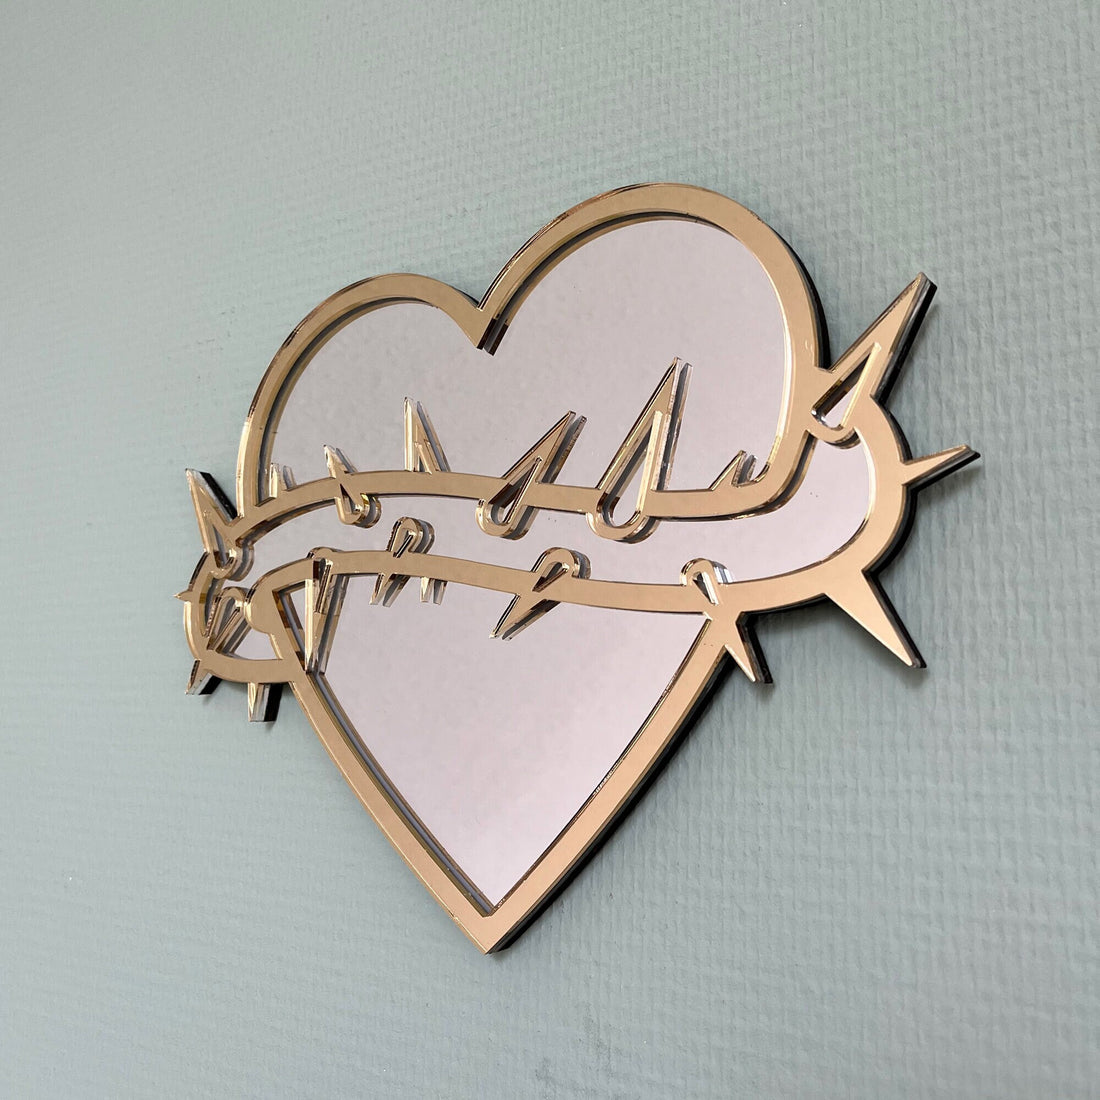 Lekky Studio&#39;s Exclusive Heart Mirror: Unique thorn design in traditional tattoo style, with luxurious gold and silver accents. Size: 29x22cm. Hand-assembled, laser-cut acrylic for a bespoke artistic touch to your decor.